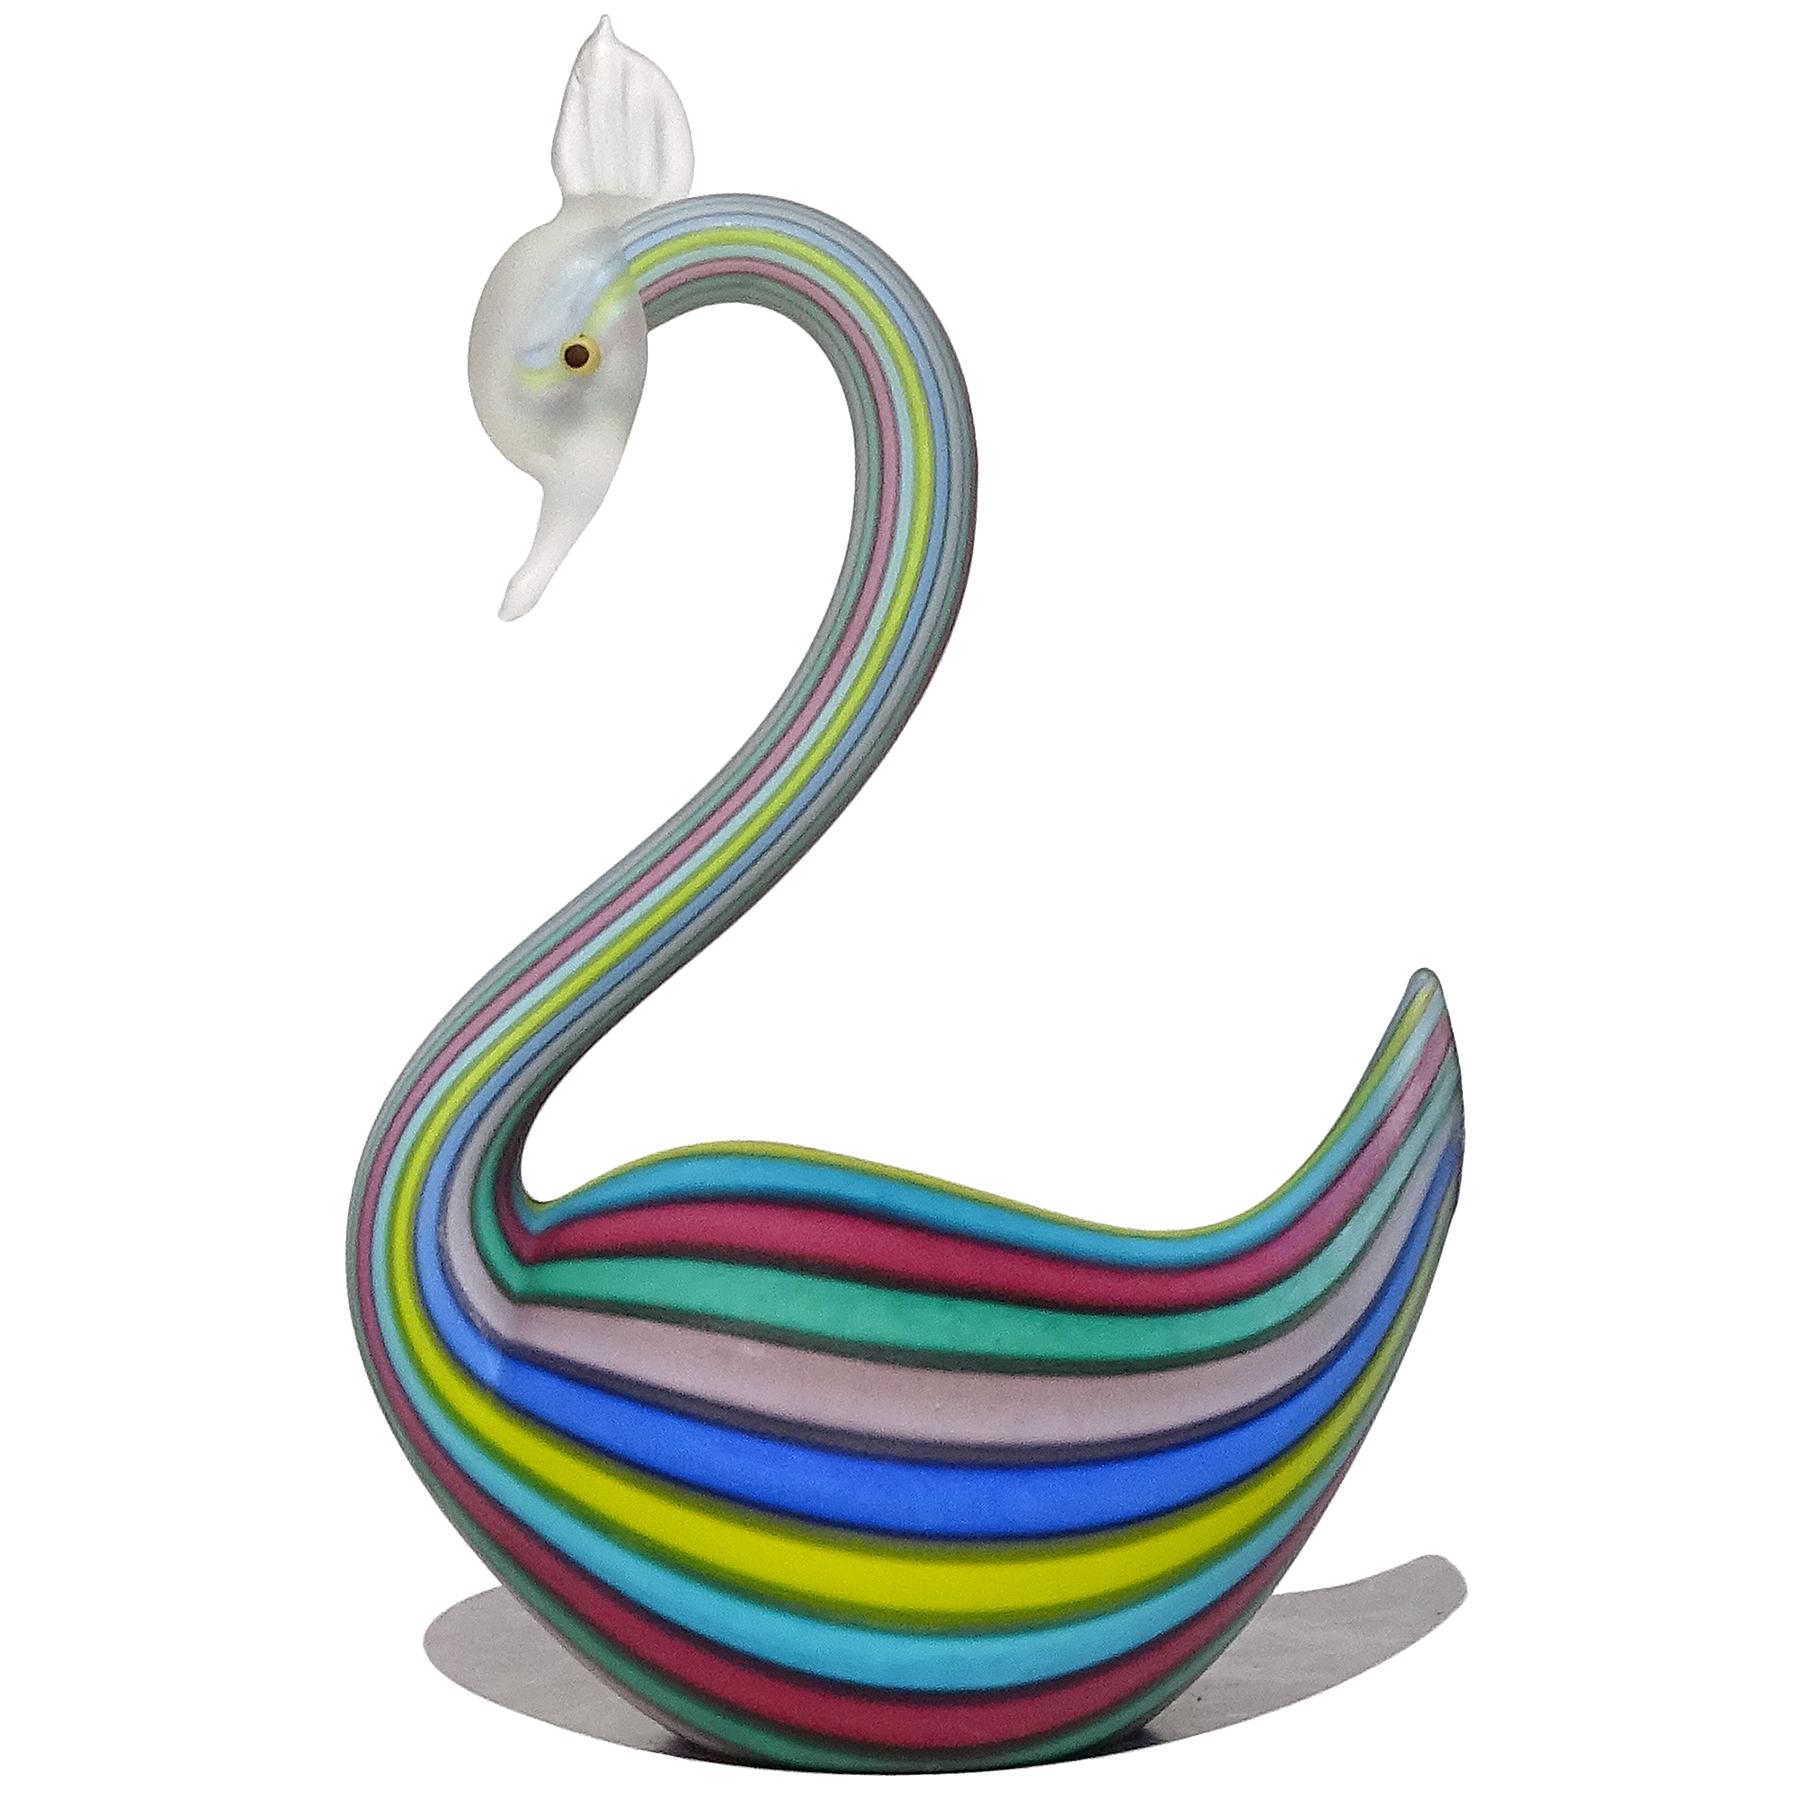 Beautiful vintage Murano hand blown rainbow Filigrana ribbons with satin surface Italian art glass swan bird figurine. The piece is documented to the Fratelli Toso company, with silver and blue shield import label still attached. It reads 